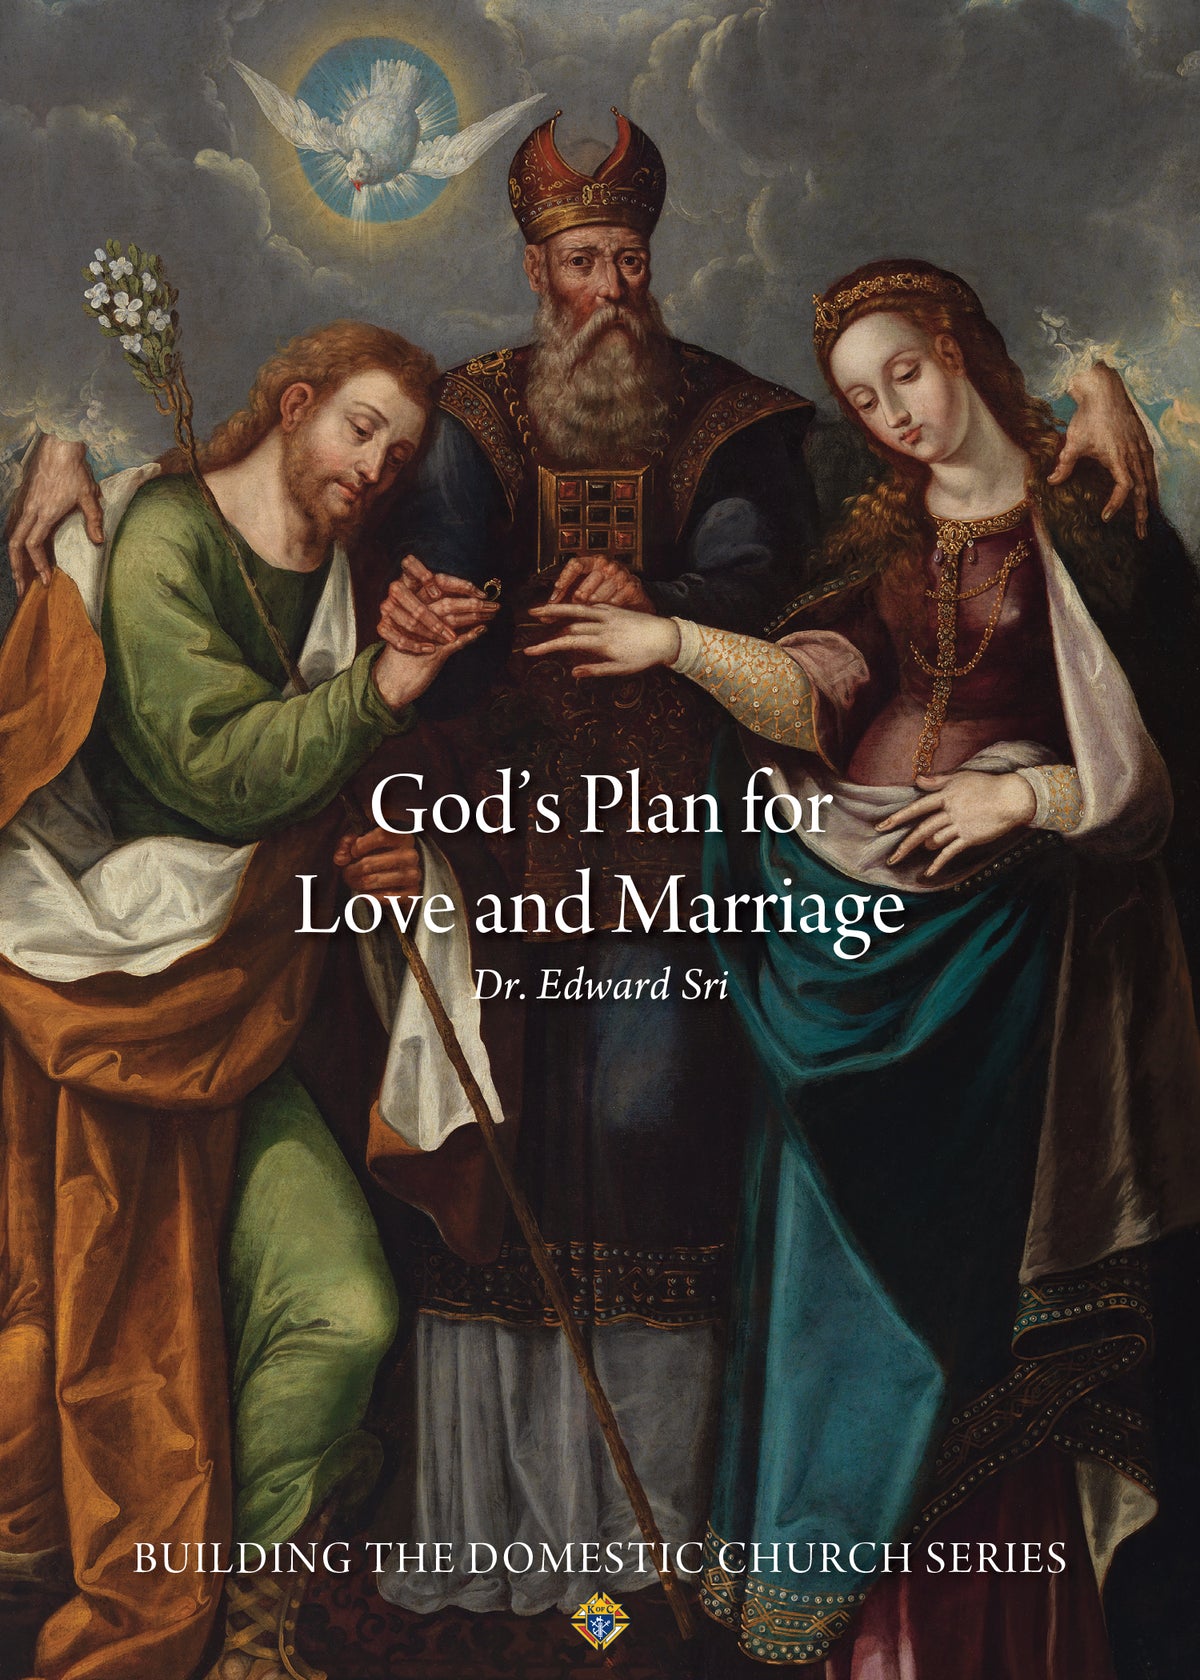 God's Plan for Love & Marriage: John Paul II's Theology of the Body